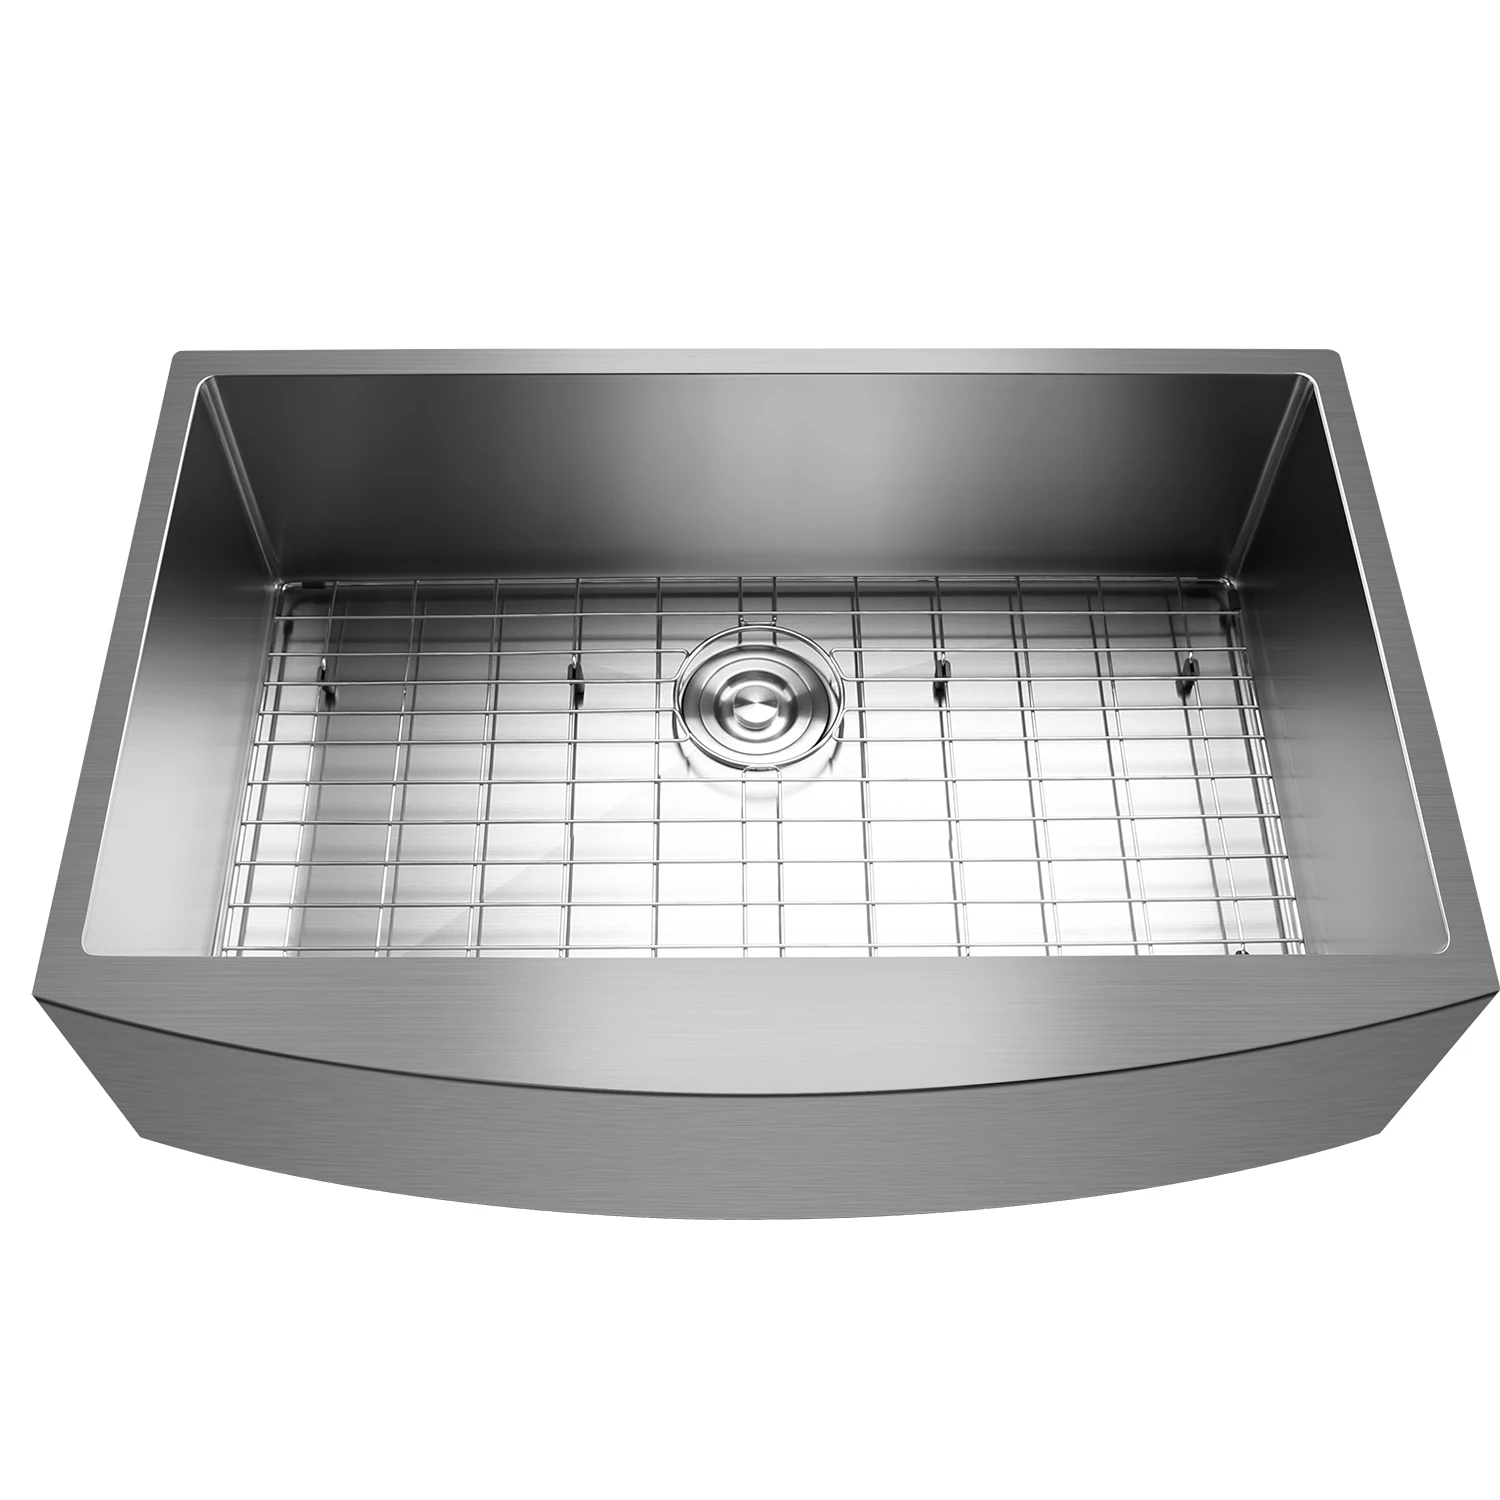 33 inch <strong>farmhouse</strong> apron front stainless steel kitchen sinks are